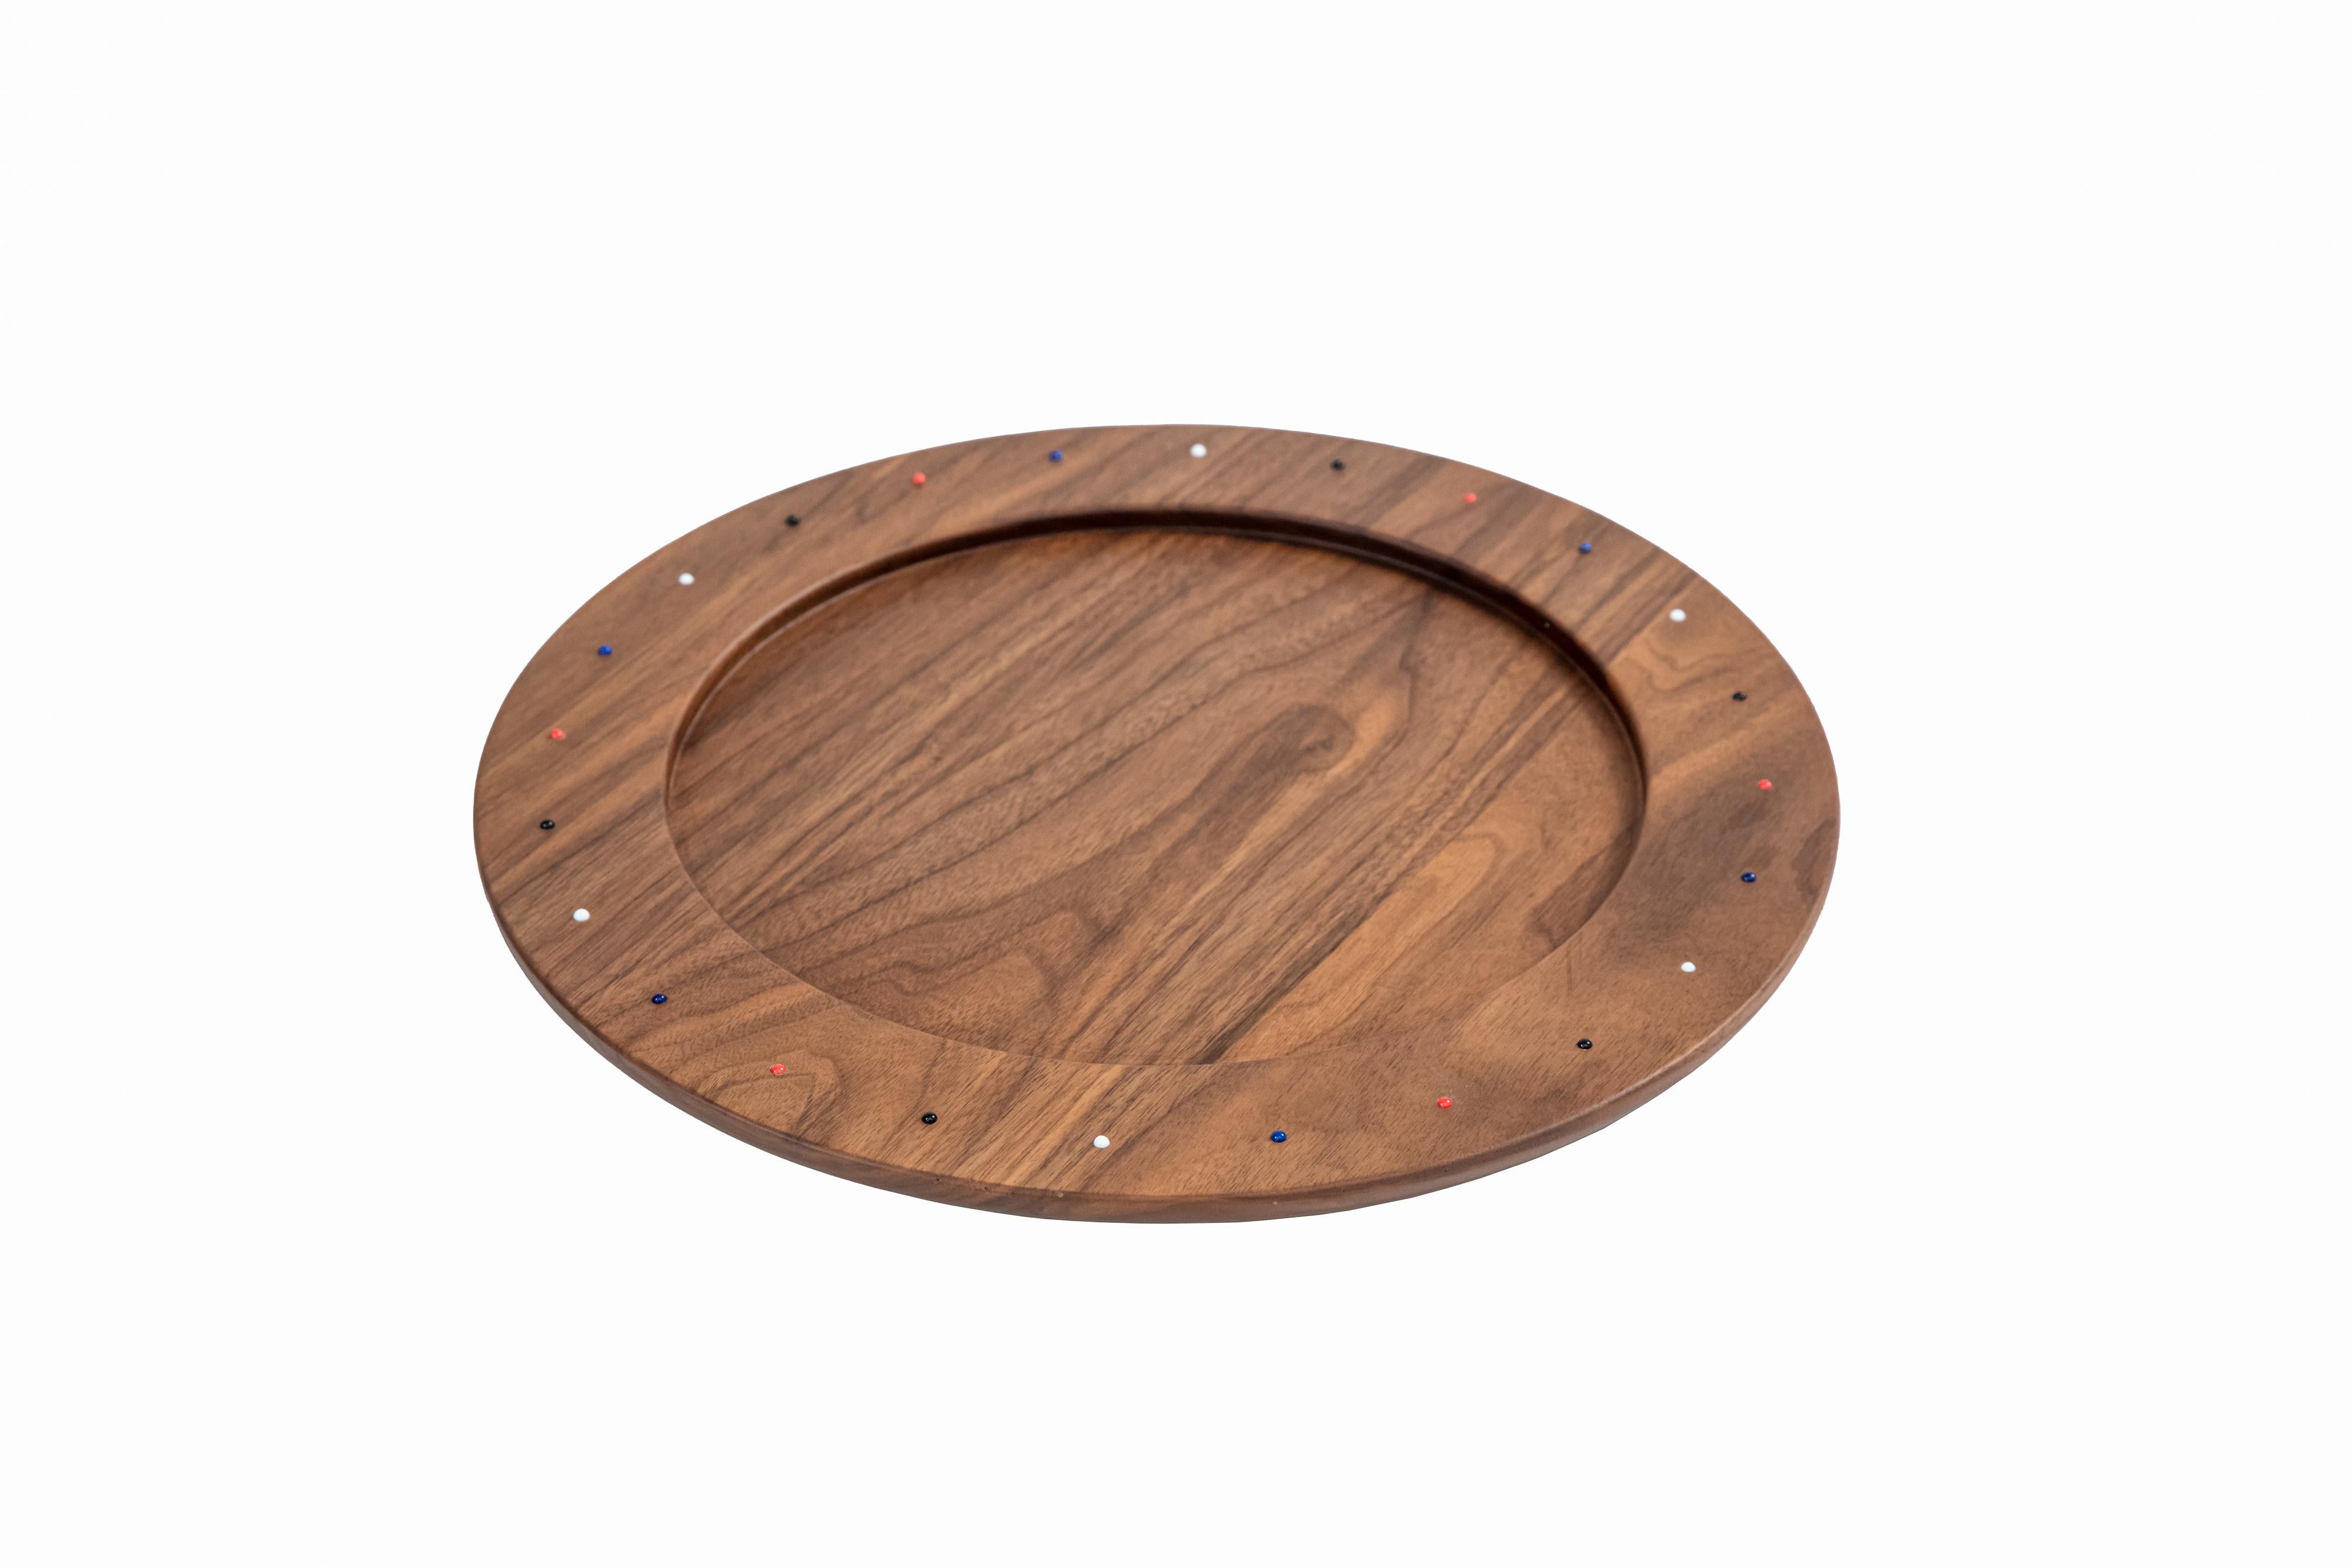 This SoShiro Pok collection piece is a perfectly round wooden charger plate or table centrepiece carved from one solid piece of walnut wood and embedded with hand-placed glass pearl bead ornamentation. 

The Pok collection celebrates the artistry of